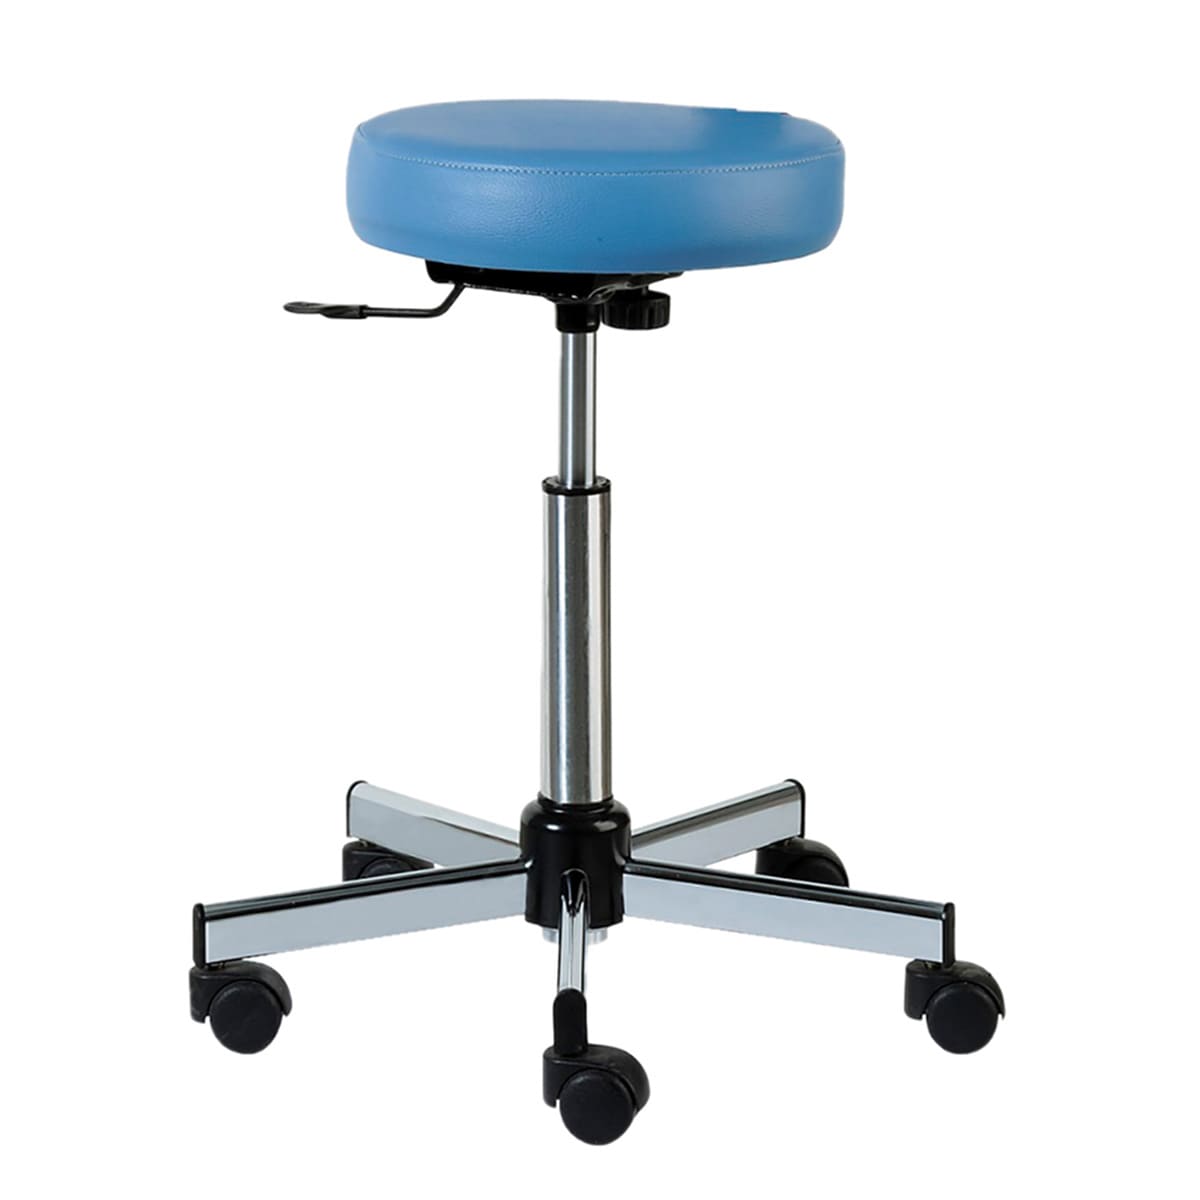 Tabouret assise ronde, base inox